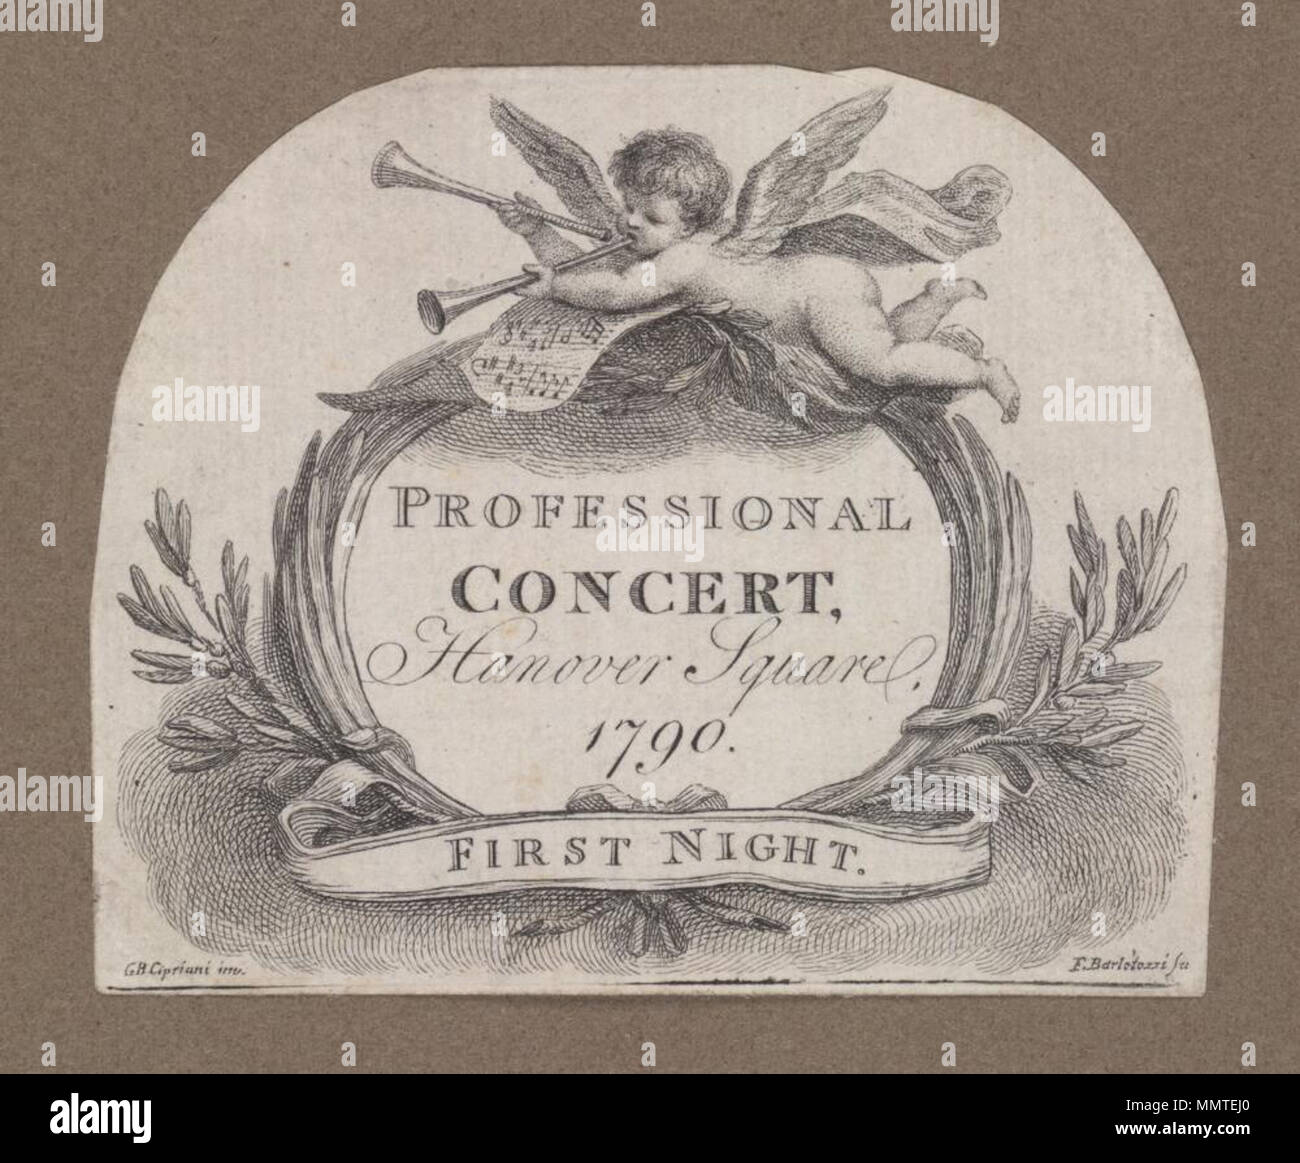 . Ticket of Hanover Square, 1790, announcing a Professional concert; 'first night'. Printed in black ink; [Ticket of Hanover Square, 1790, announcing a Professional concert ]  [Ticket of Hanover Square, 1790, announcing a Professional concert ]. 1790. Hanover Square ([London], England) [author] Bodleian Libraries, Ticket of Hanover Square, 1790, announcing a Professional concert Stock Photo